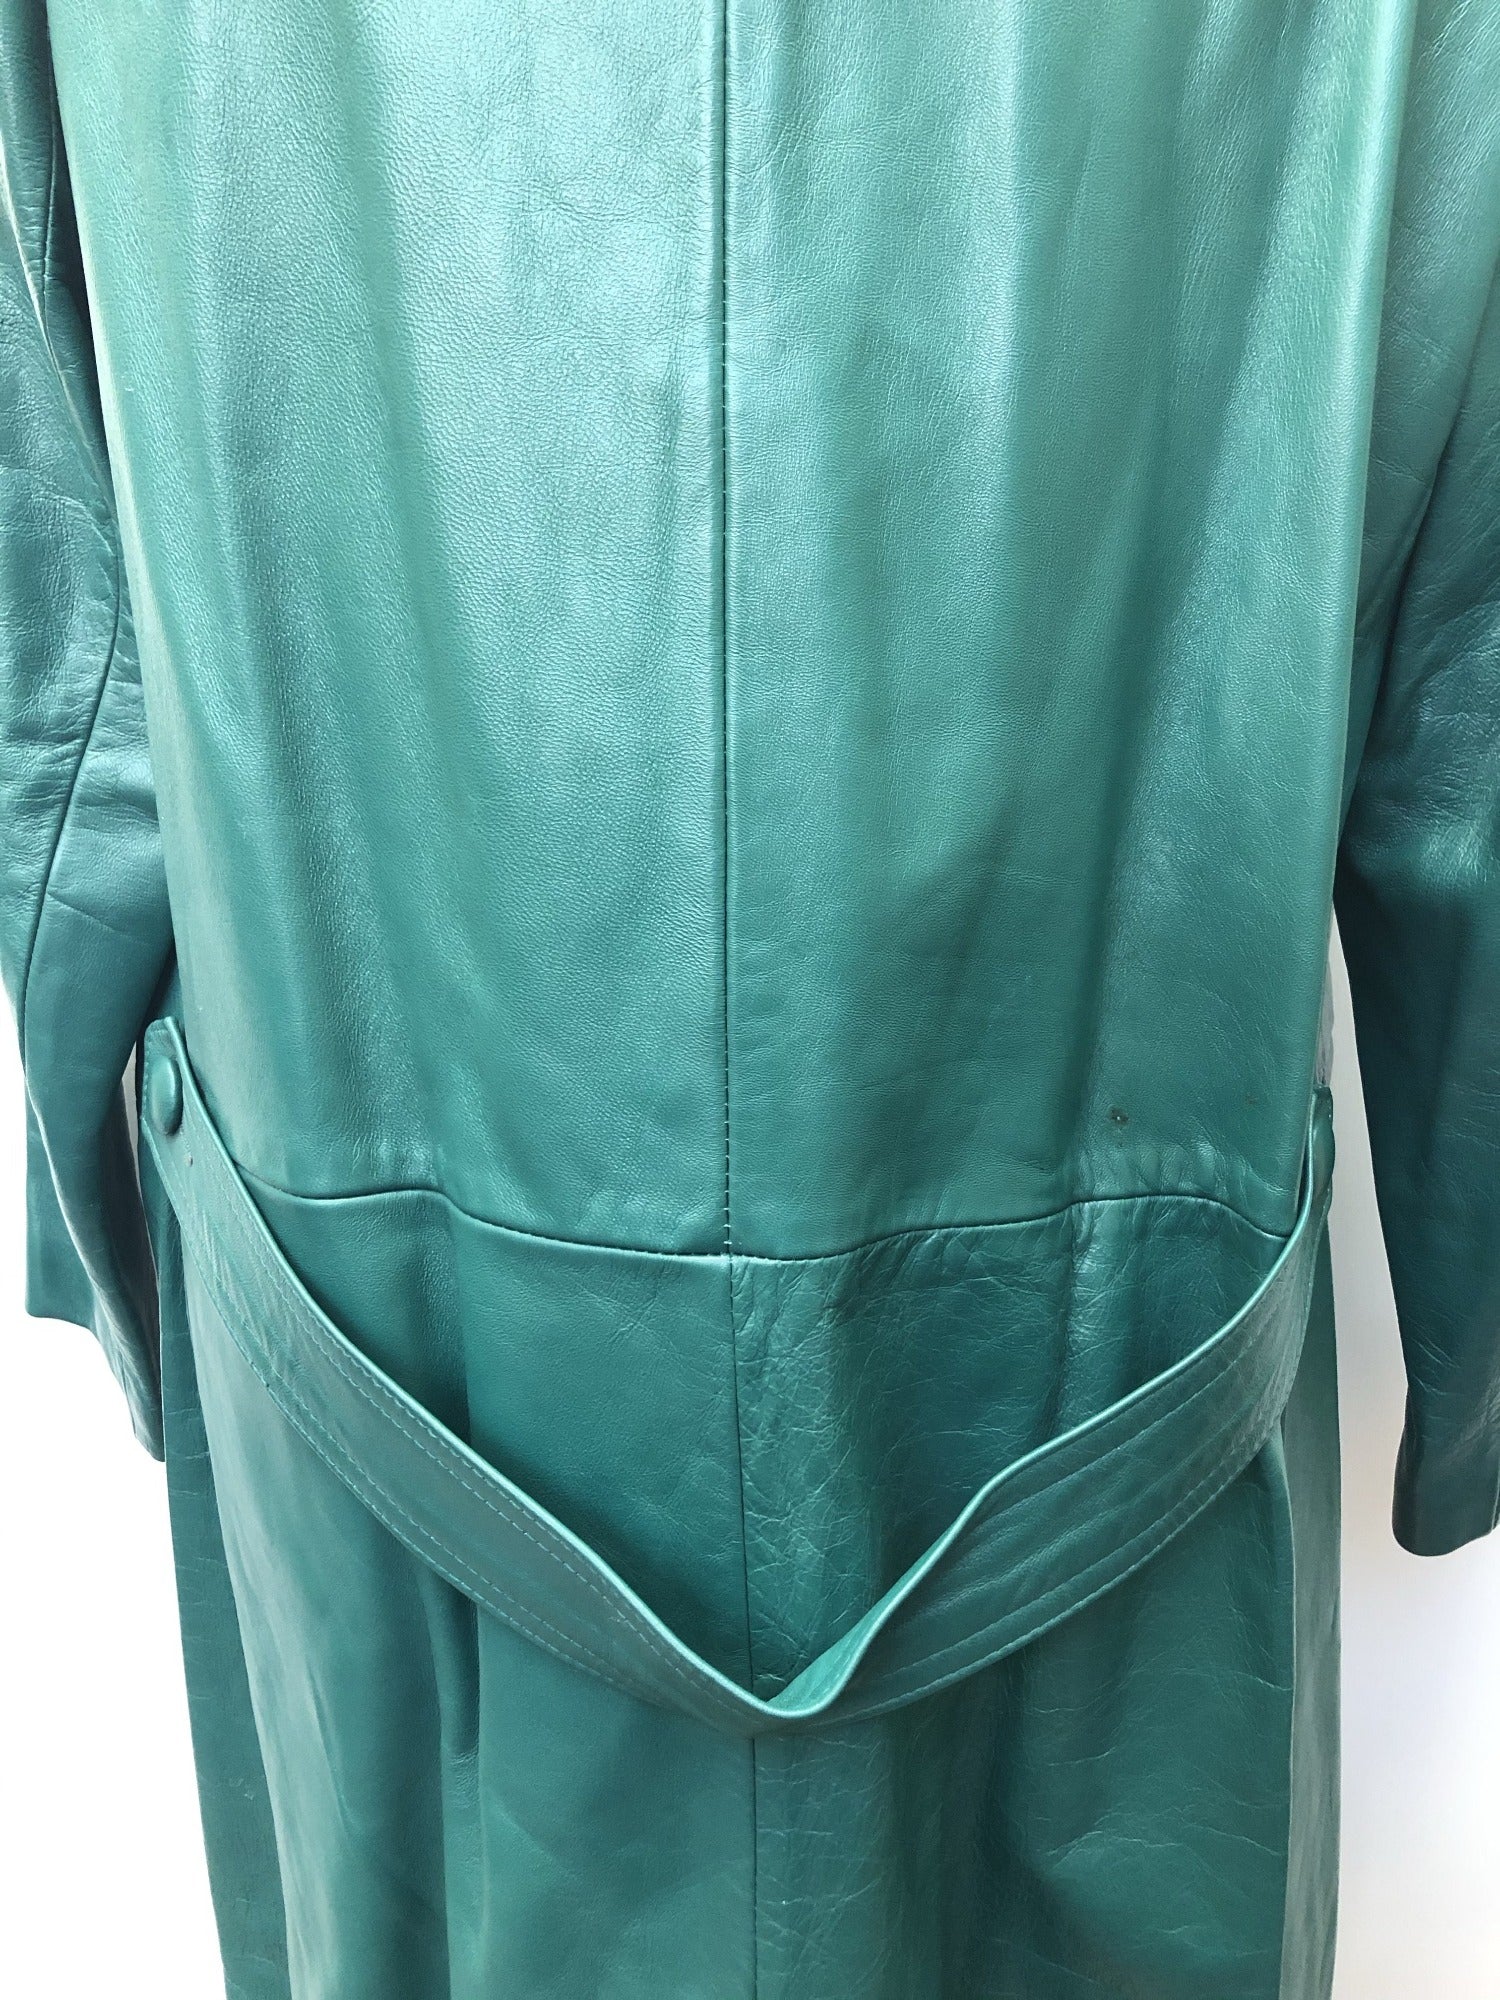 Vintage 1960s Paul Blanche Leather Coat -in Green - Size UK 12 - Womens ...